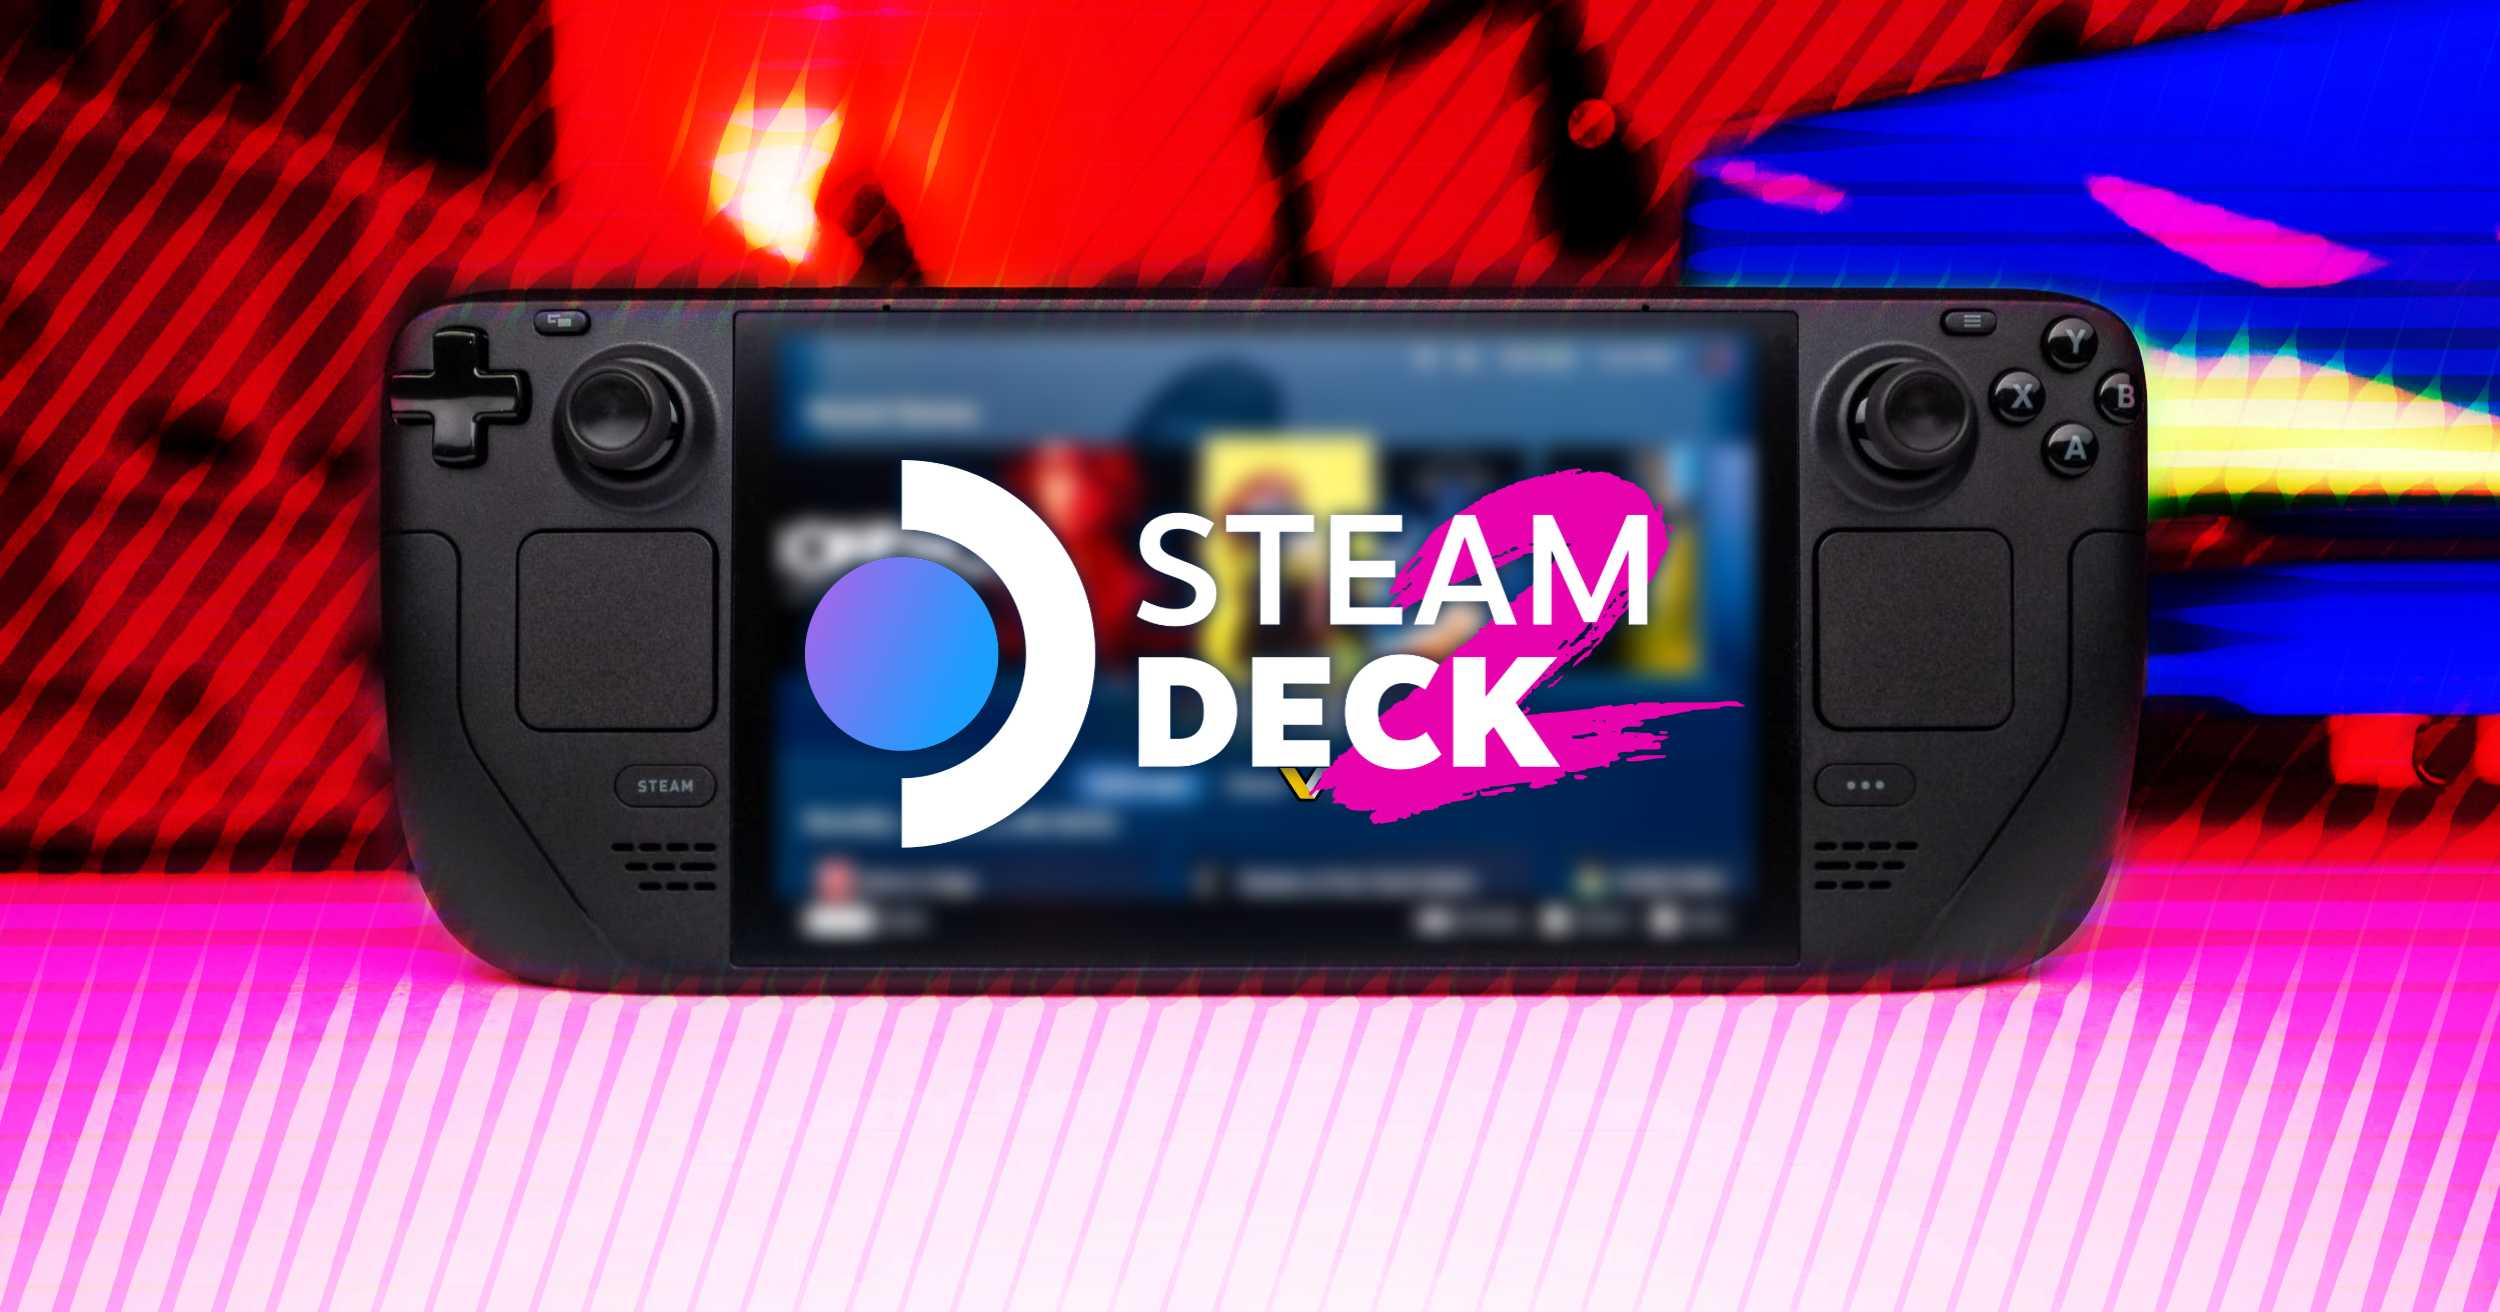 Steam Deck OLED review: better, not faster - The Verge